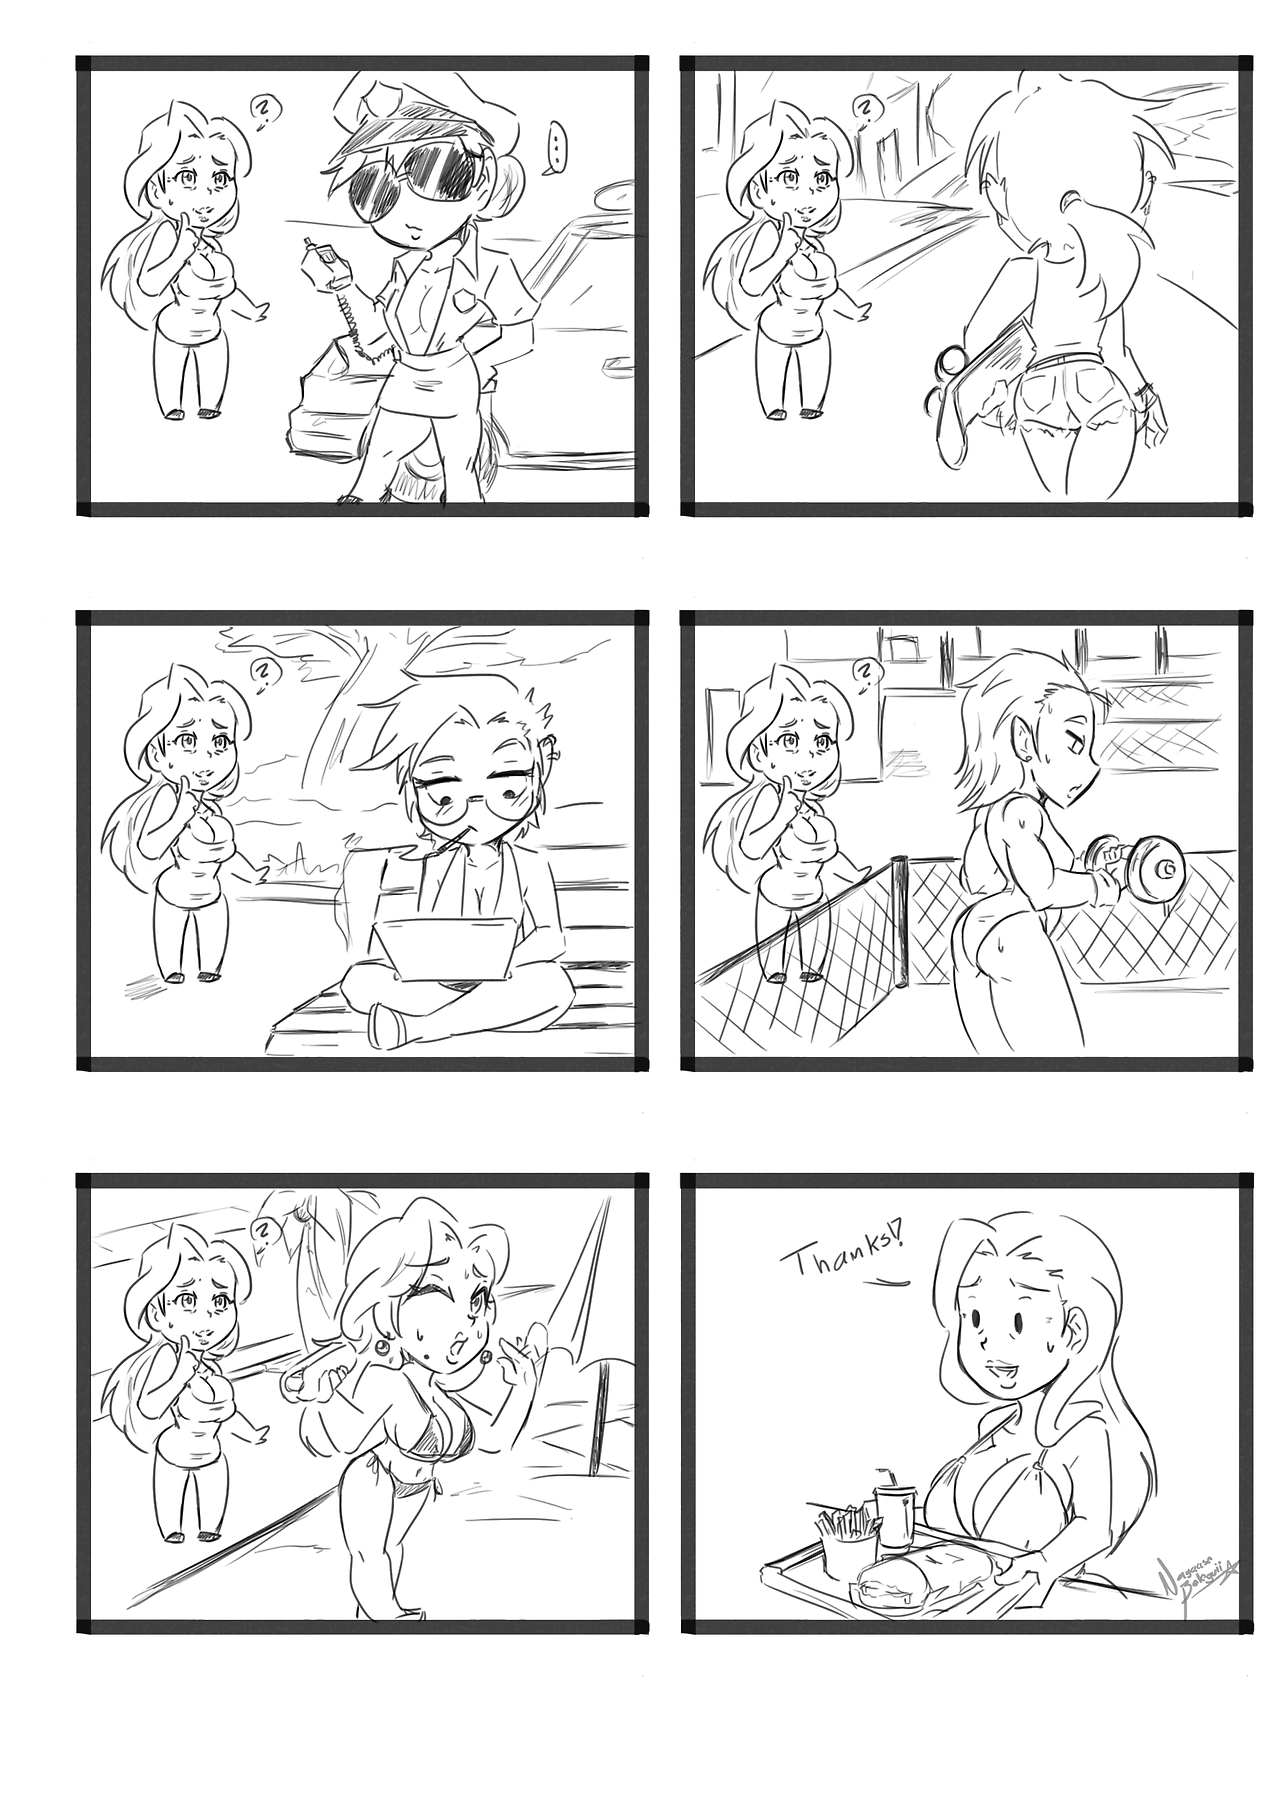 zapotecdarkstar: Jwargod comissioned me a comic from the same story, this time our